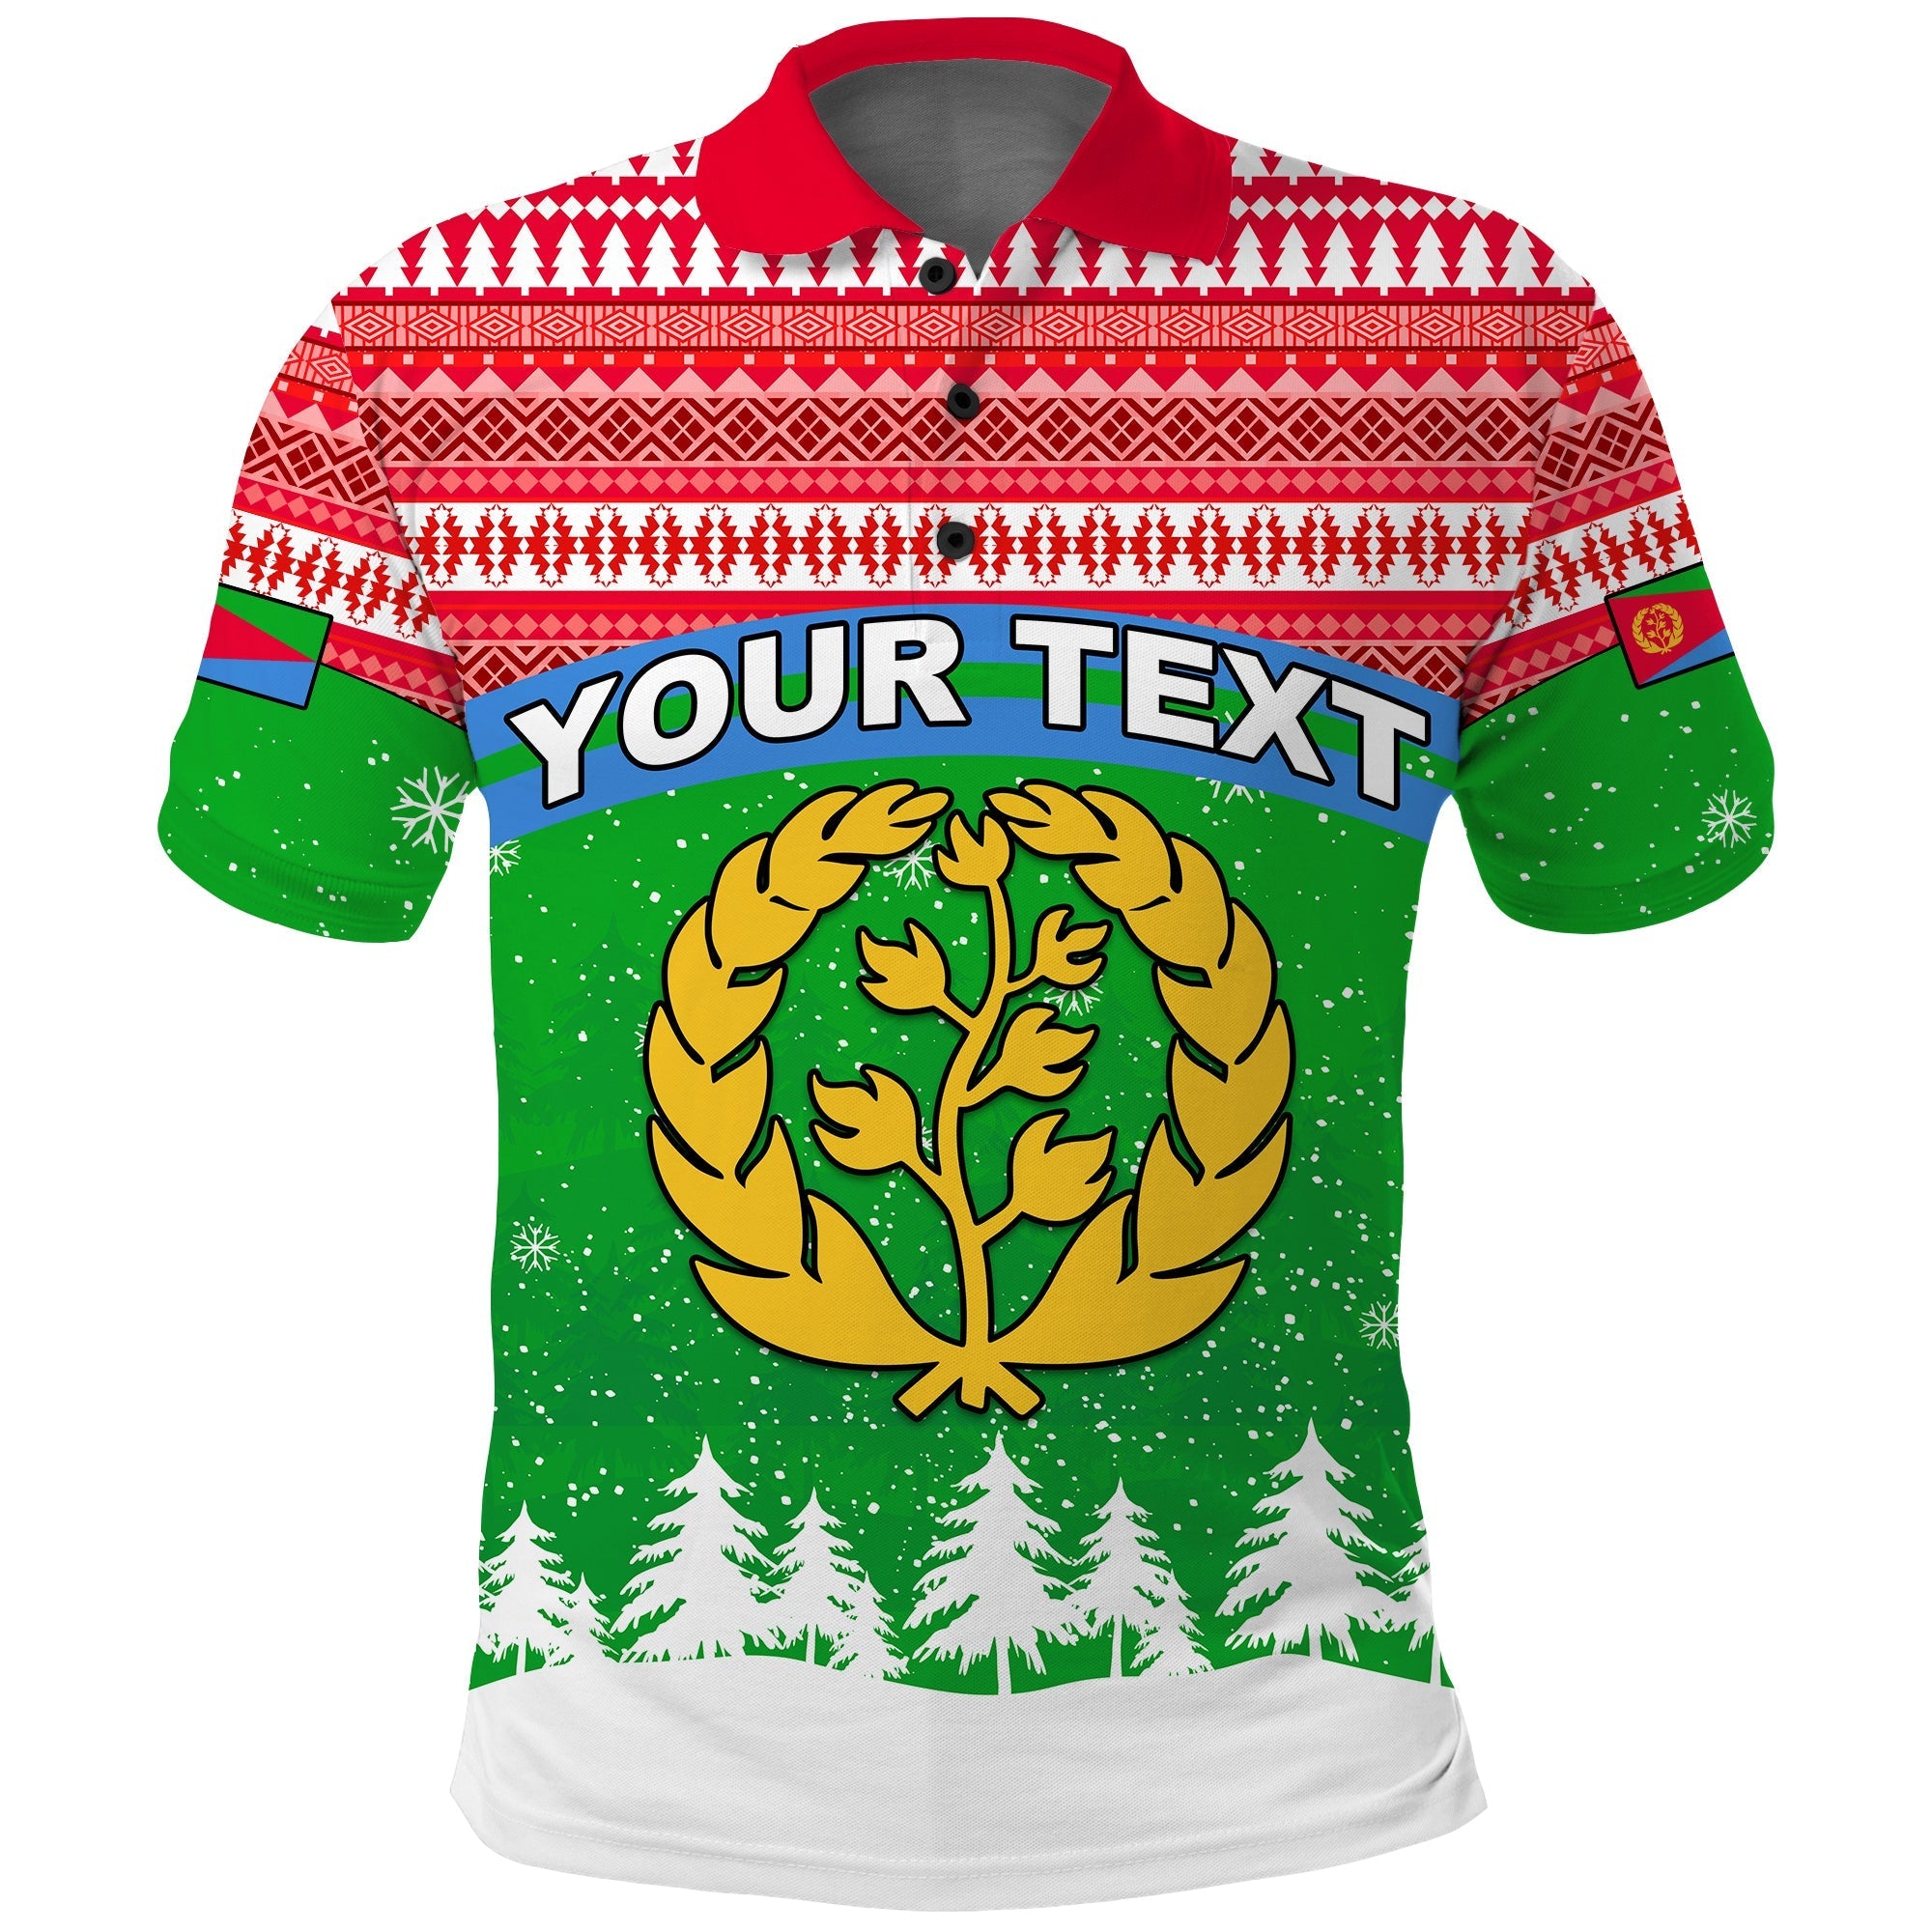 custom-personalised-eritrea-polo-shirt-merry-christmas-mix-african-pattern